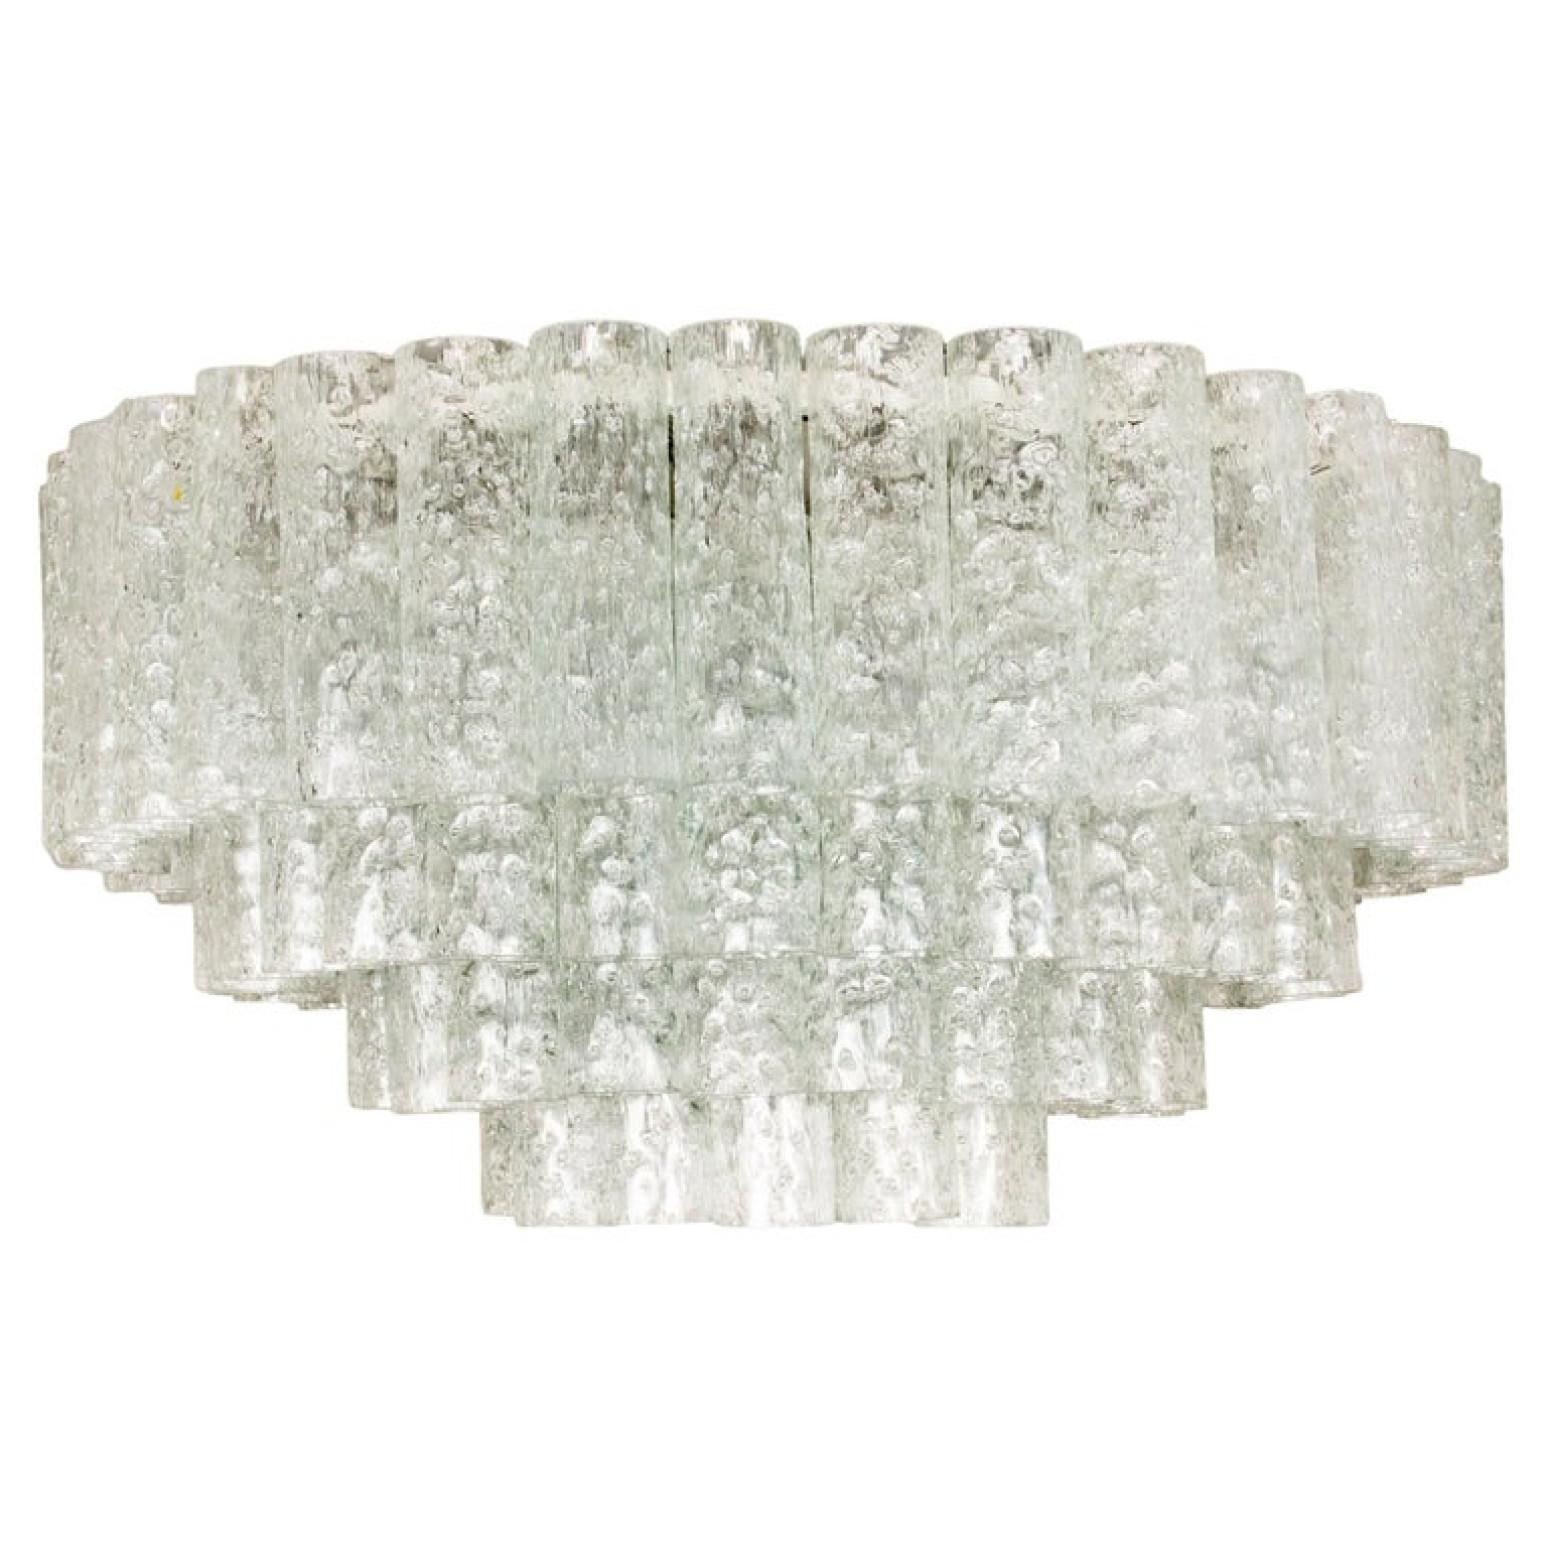 1 of the 2 of exceptional flush mount chandeliers by Doria, Germany, manufactured in circa 1970, (late 1960s and early 1970s). Four tiers bearing 96 separate blown Murano tubes of glass.

The stylish and clean elegance of this pair suits many